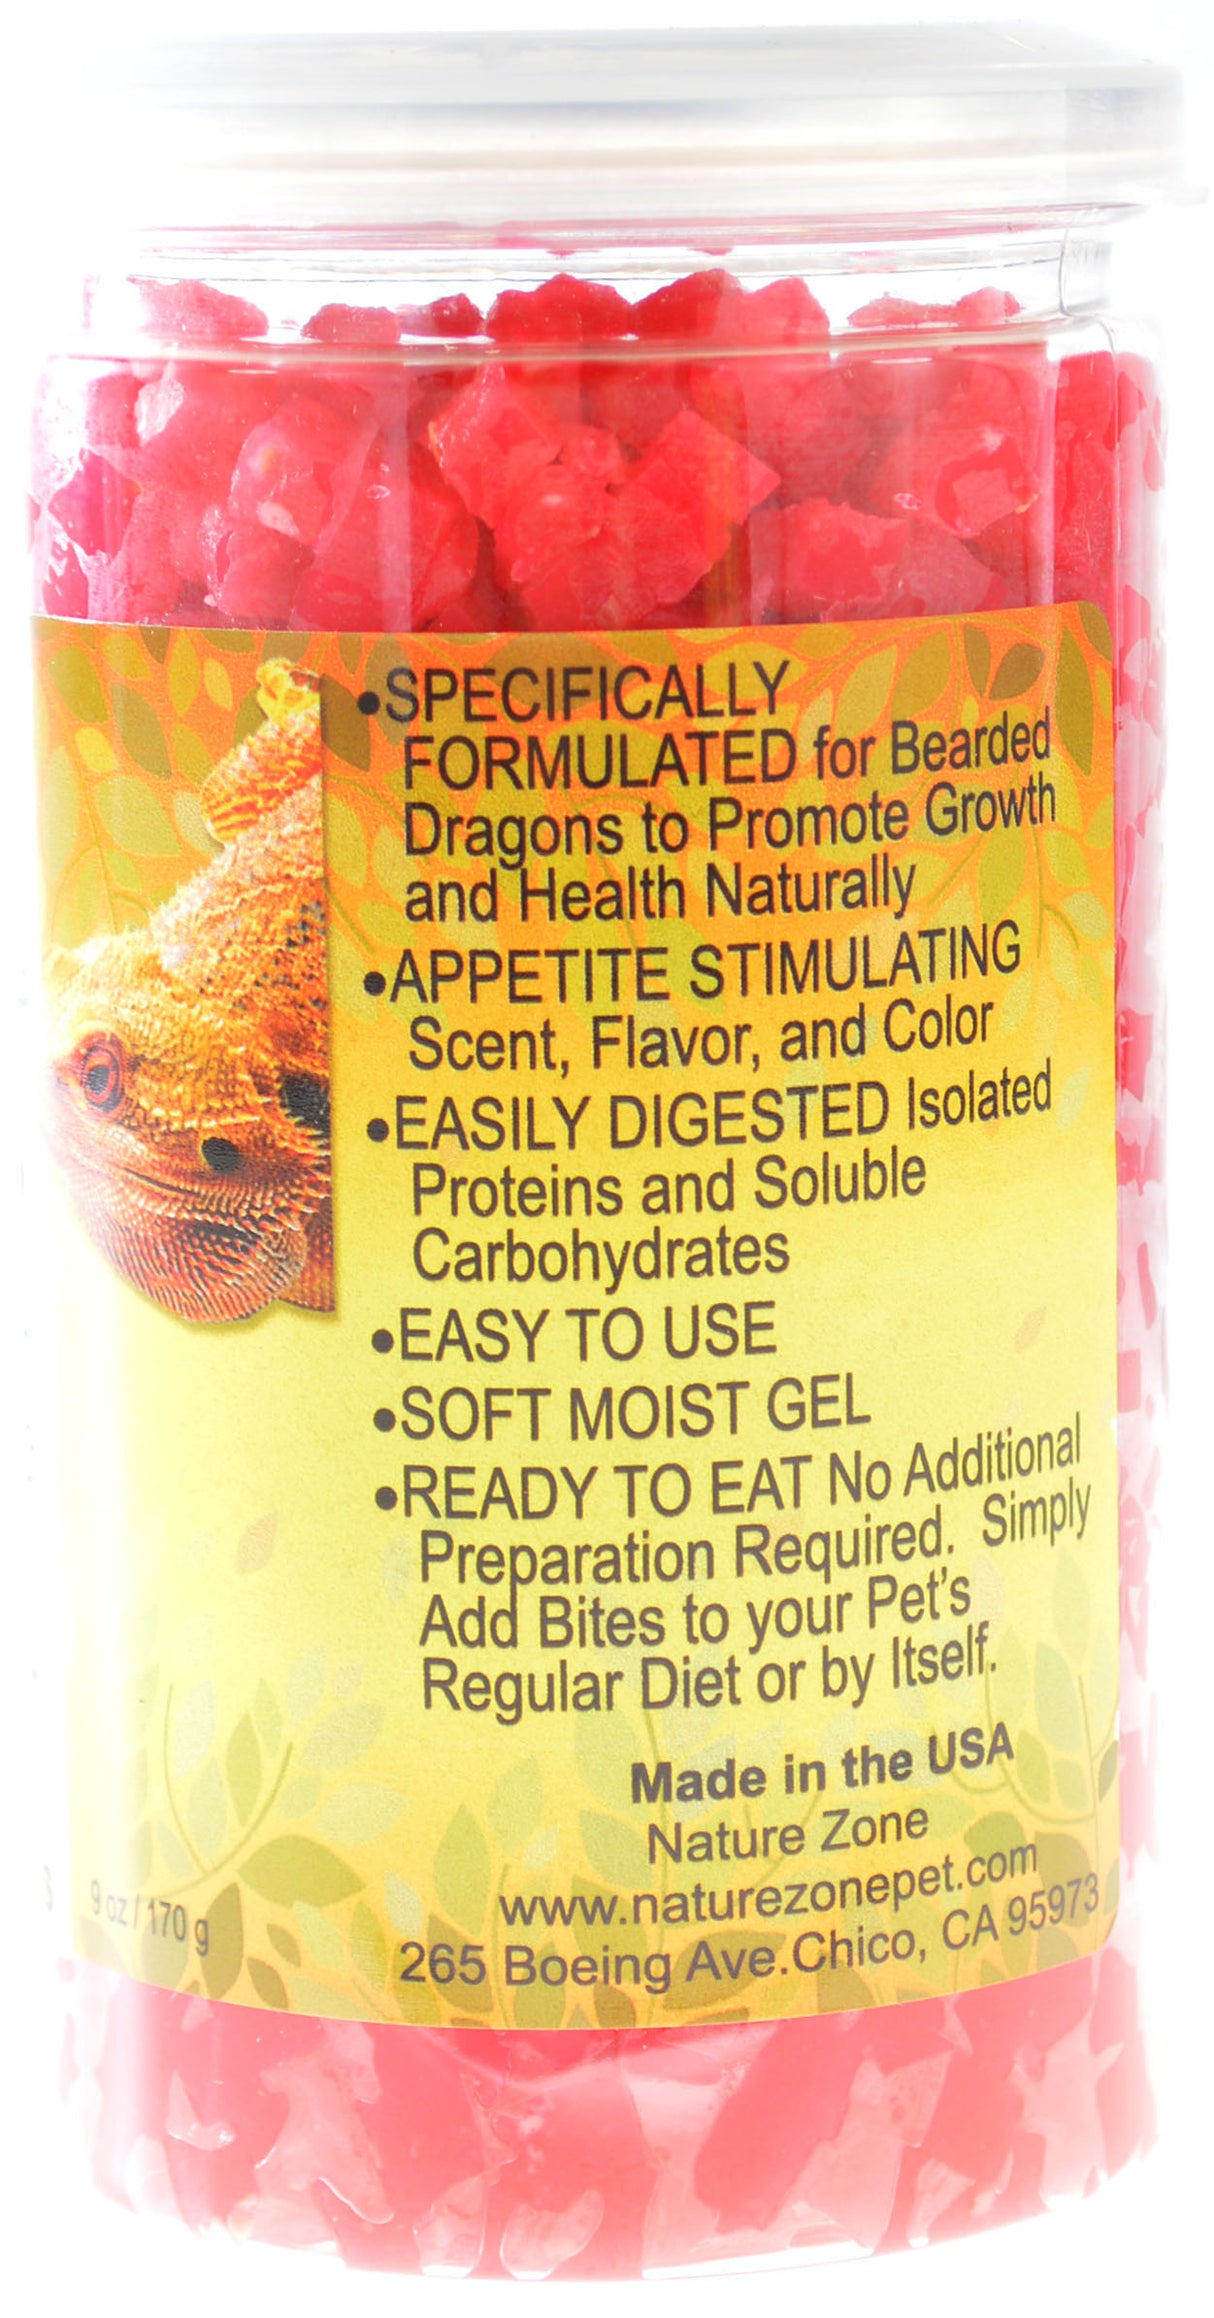 9 oz Nature Zone Natural Bites for Bearded Dragons